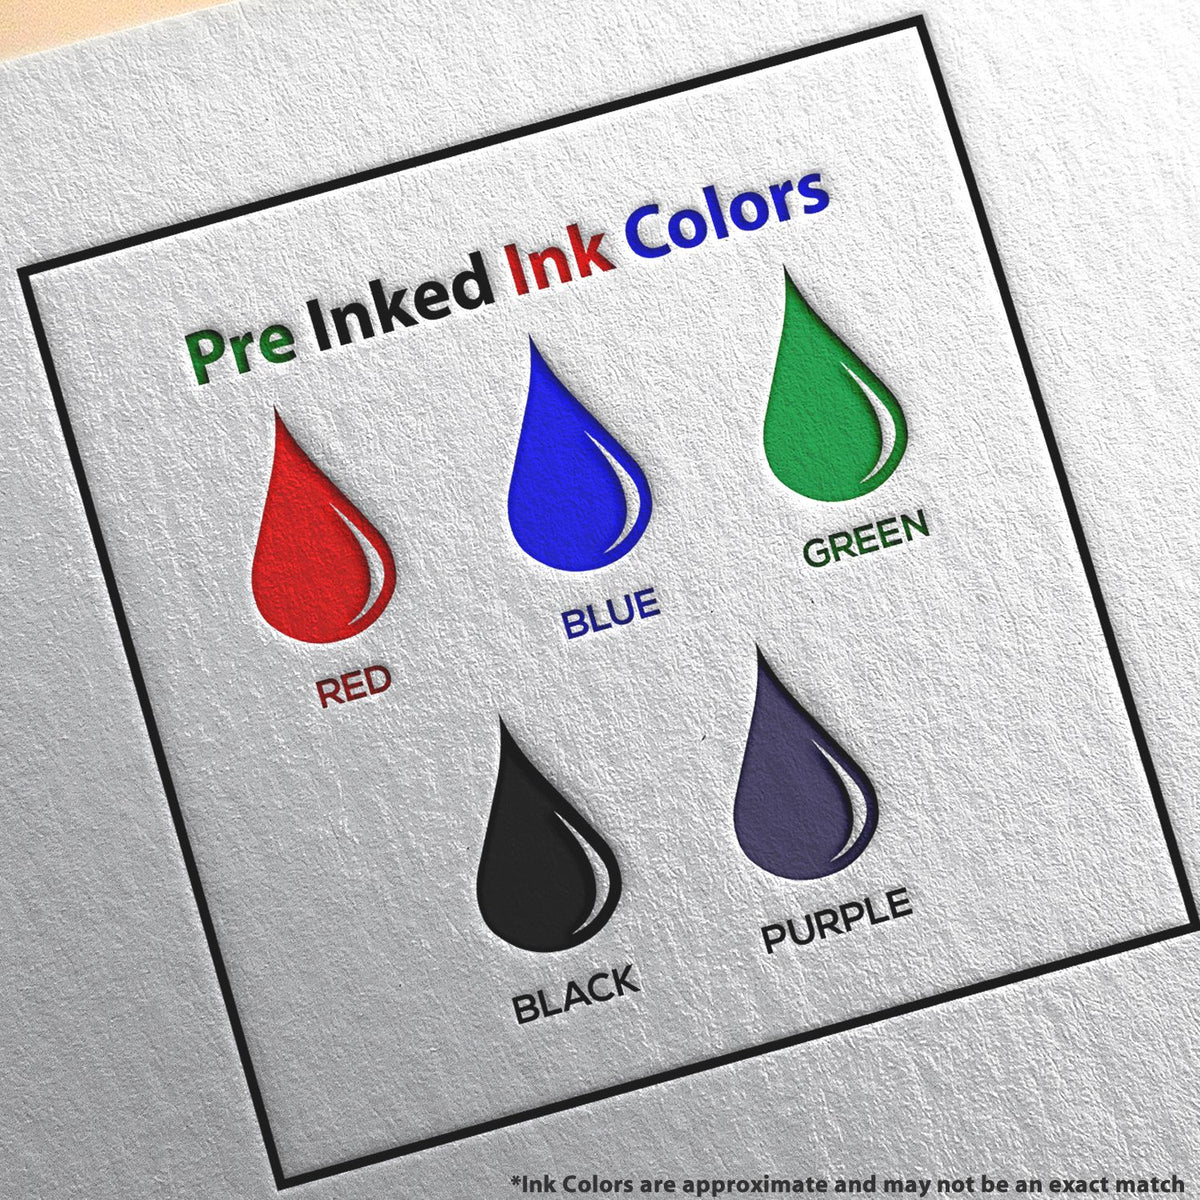 A picture showing the different ink colors or hues available for the Premium MaxLight Pre-Inked Guam Landscape Architectural Stamp product.